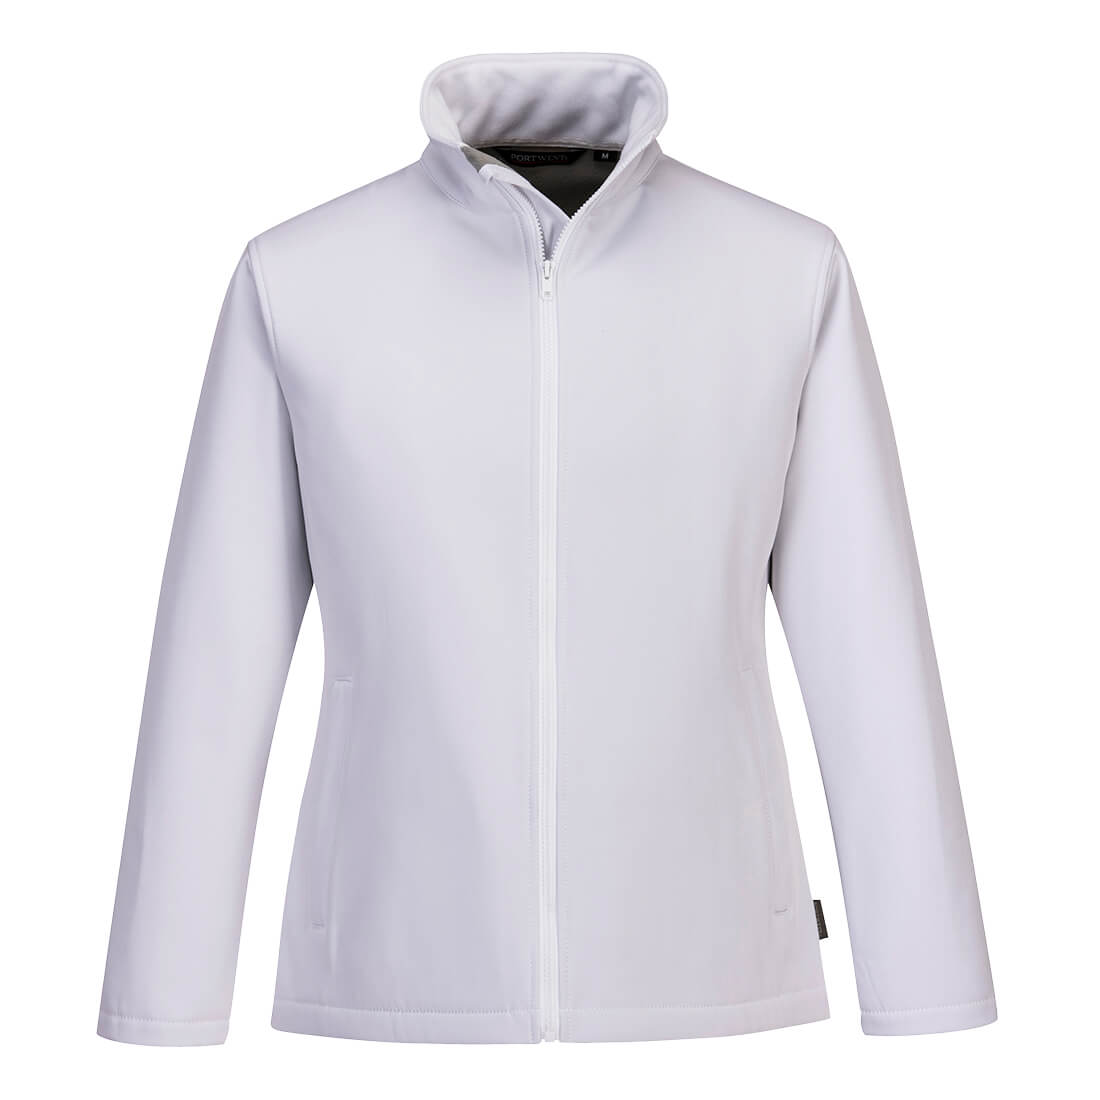 Portwest Women's Print and Promo Softshell